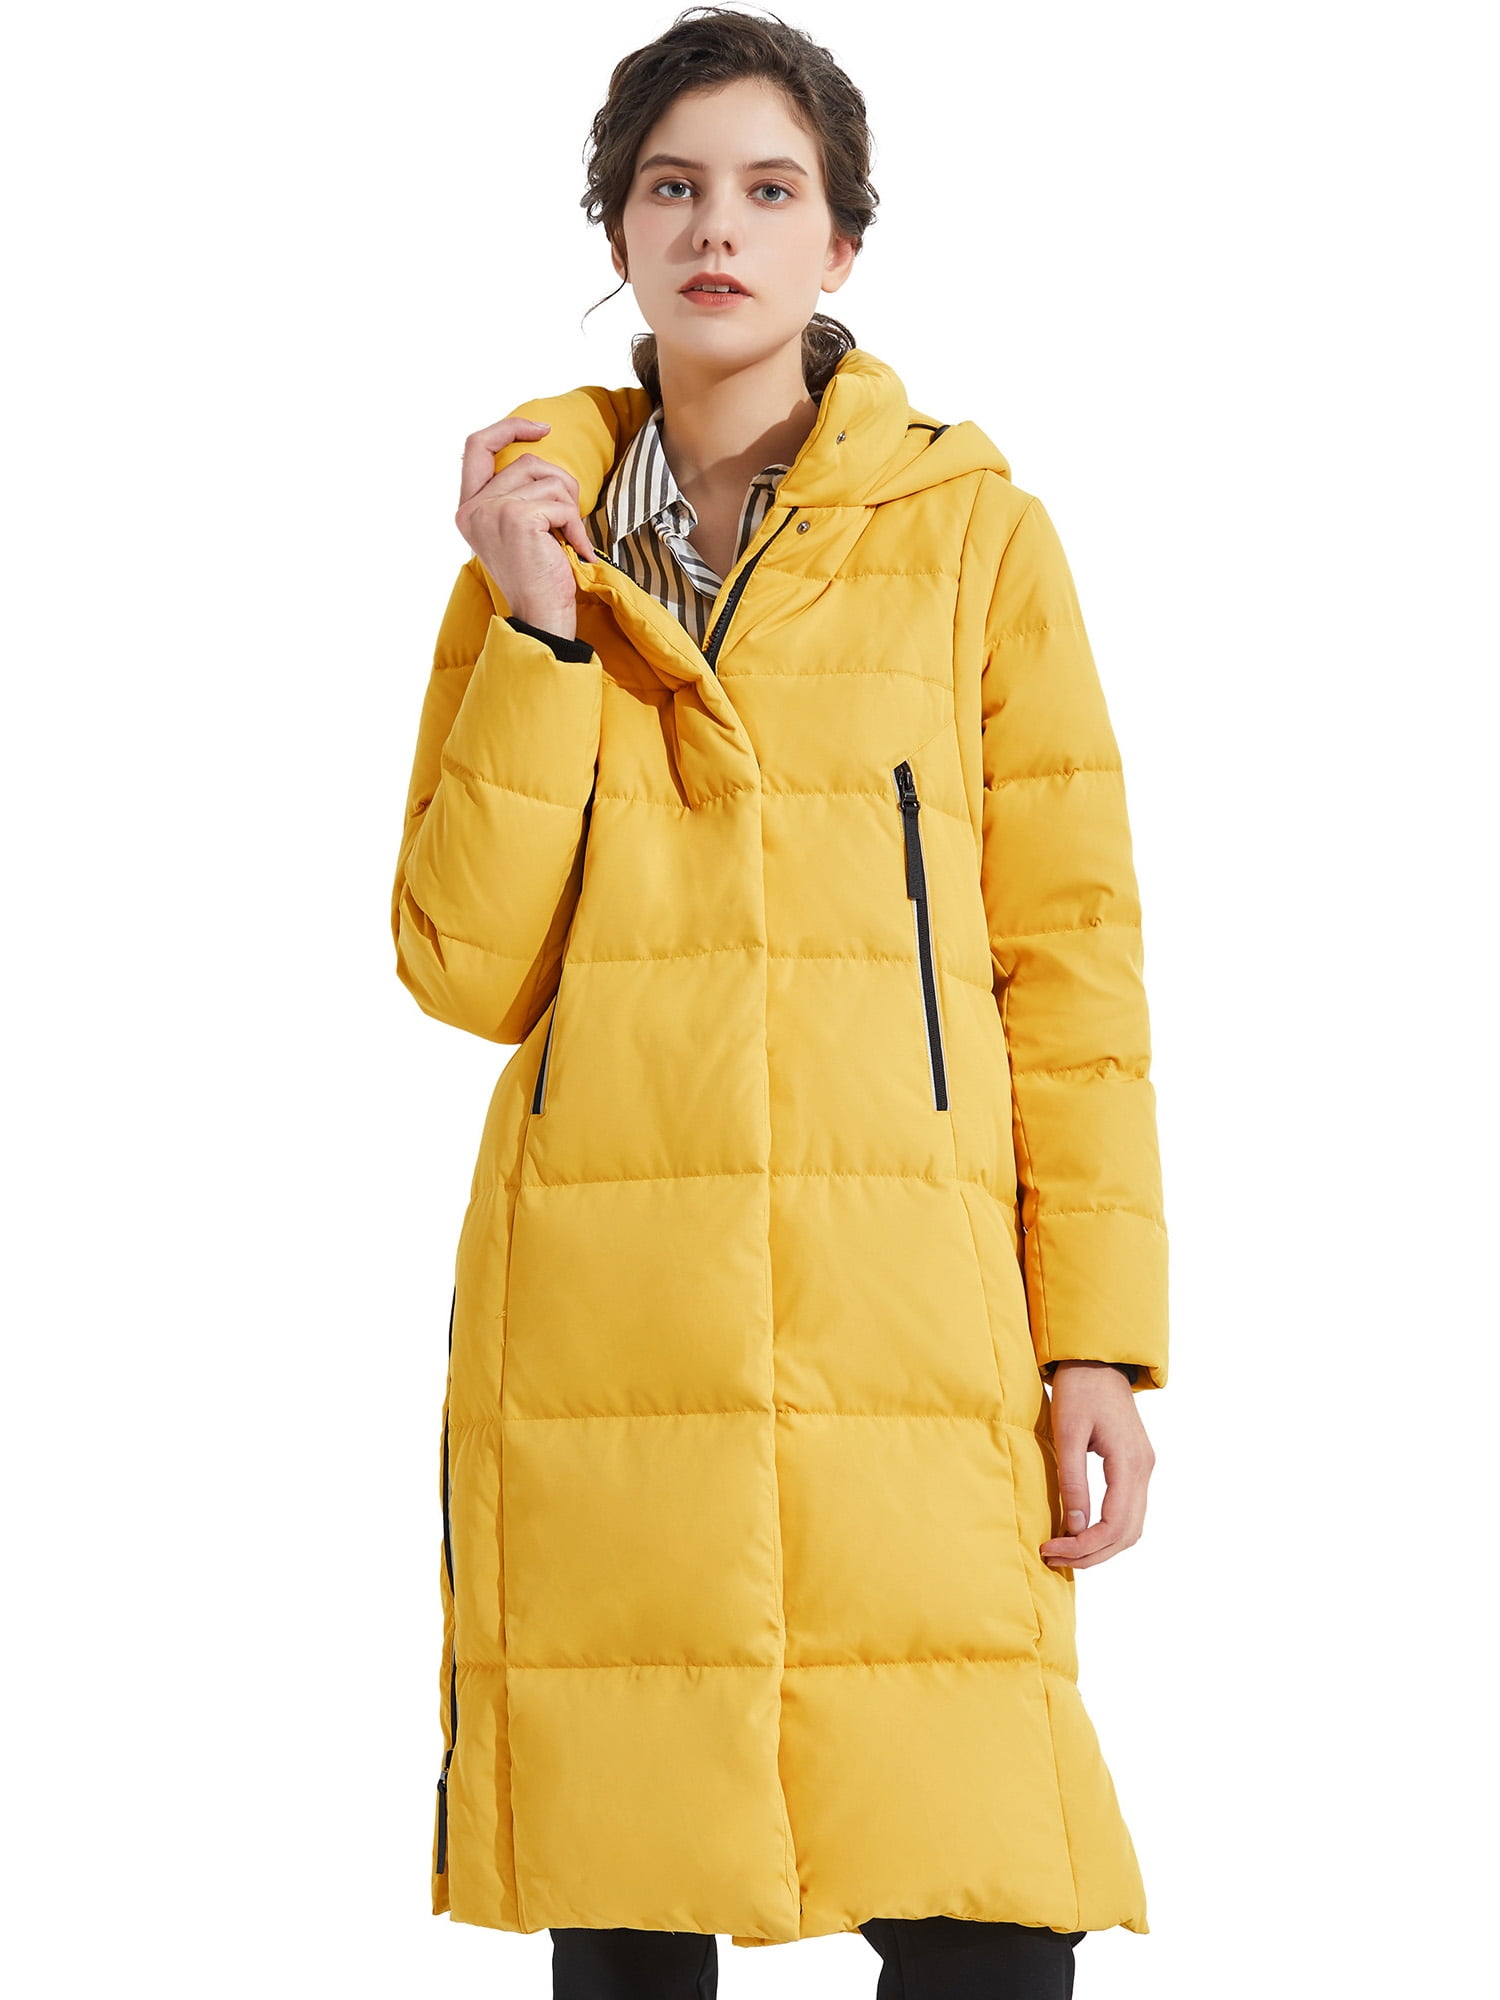 Orolay Womens Quilted Down Jacket Puffer Coat with Detachable Hood 